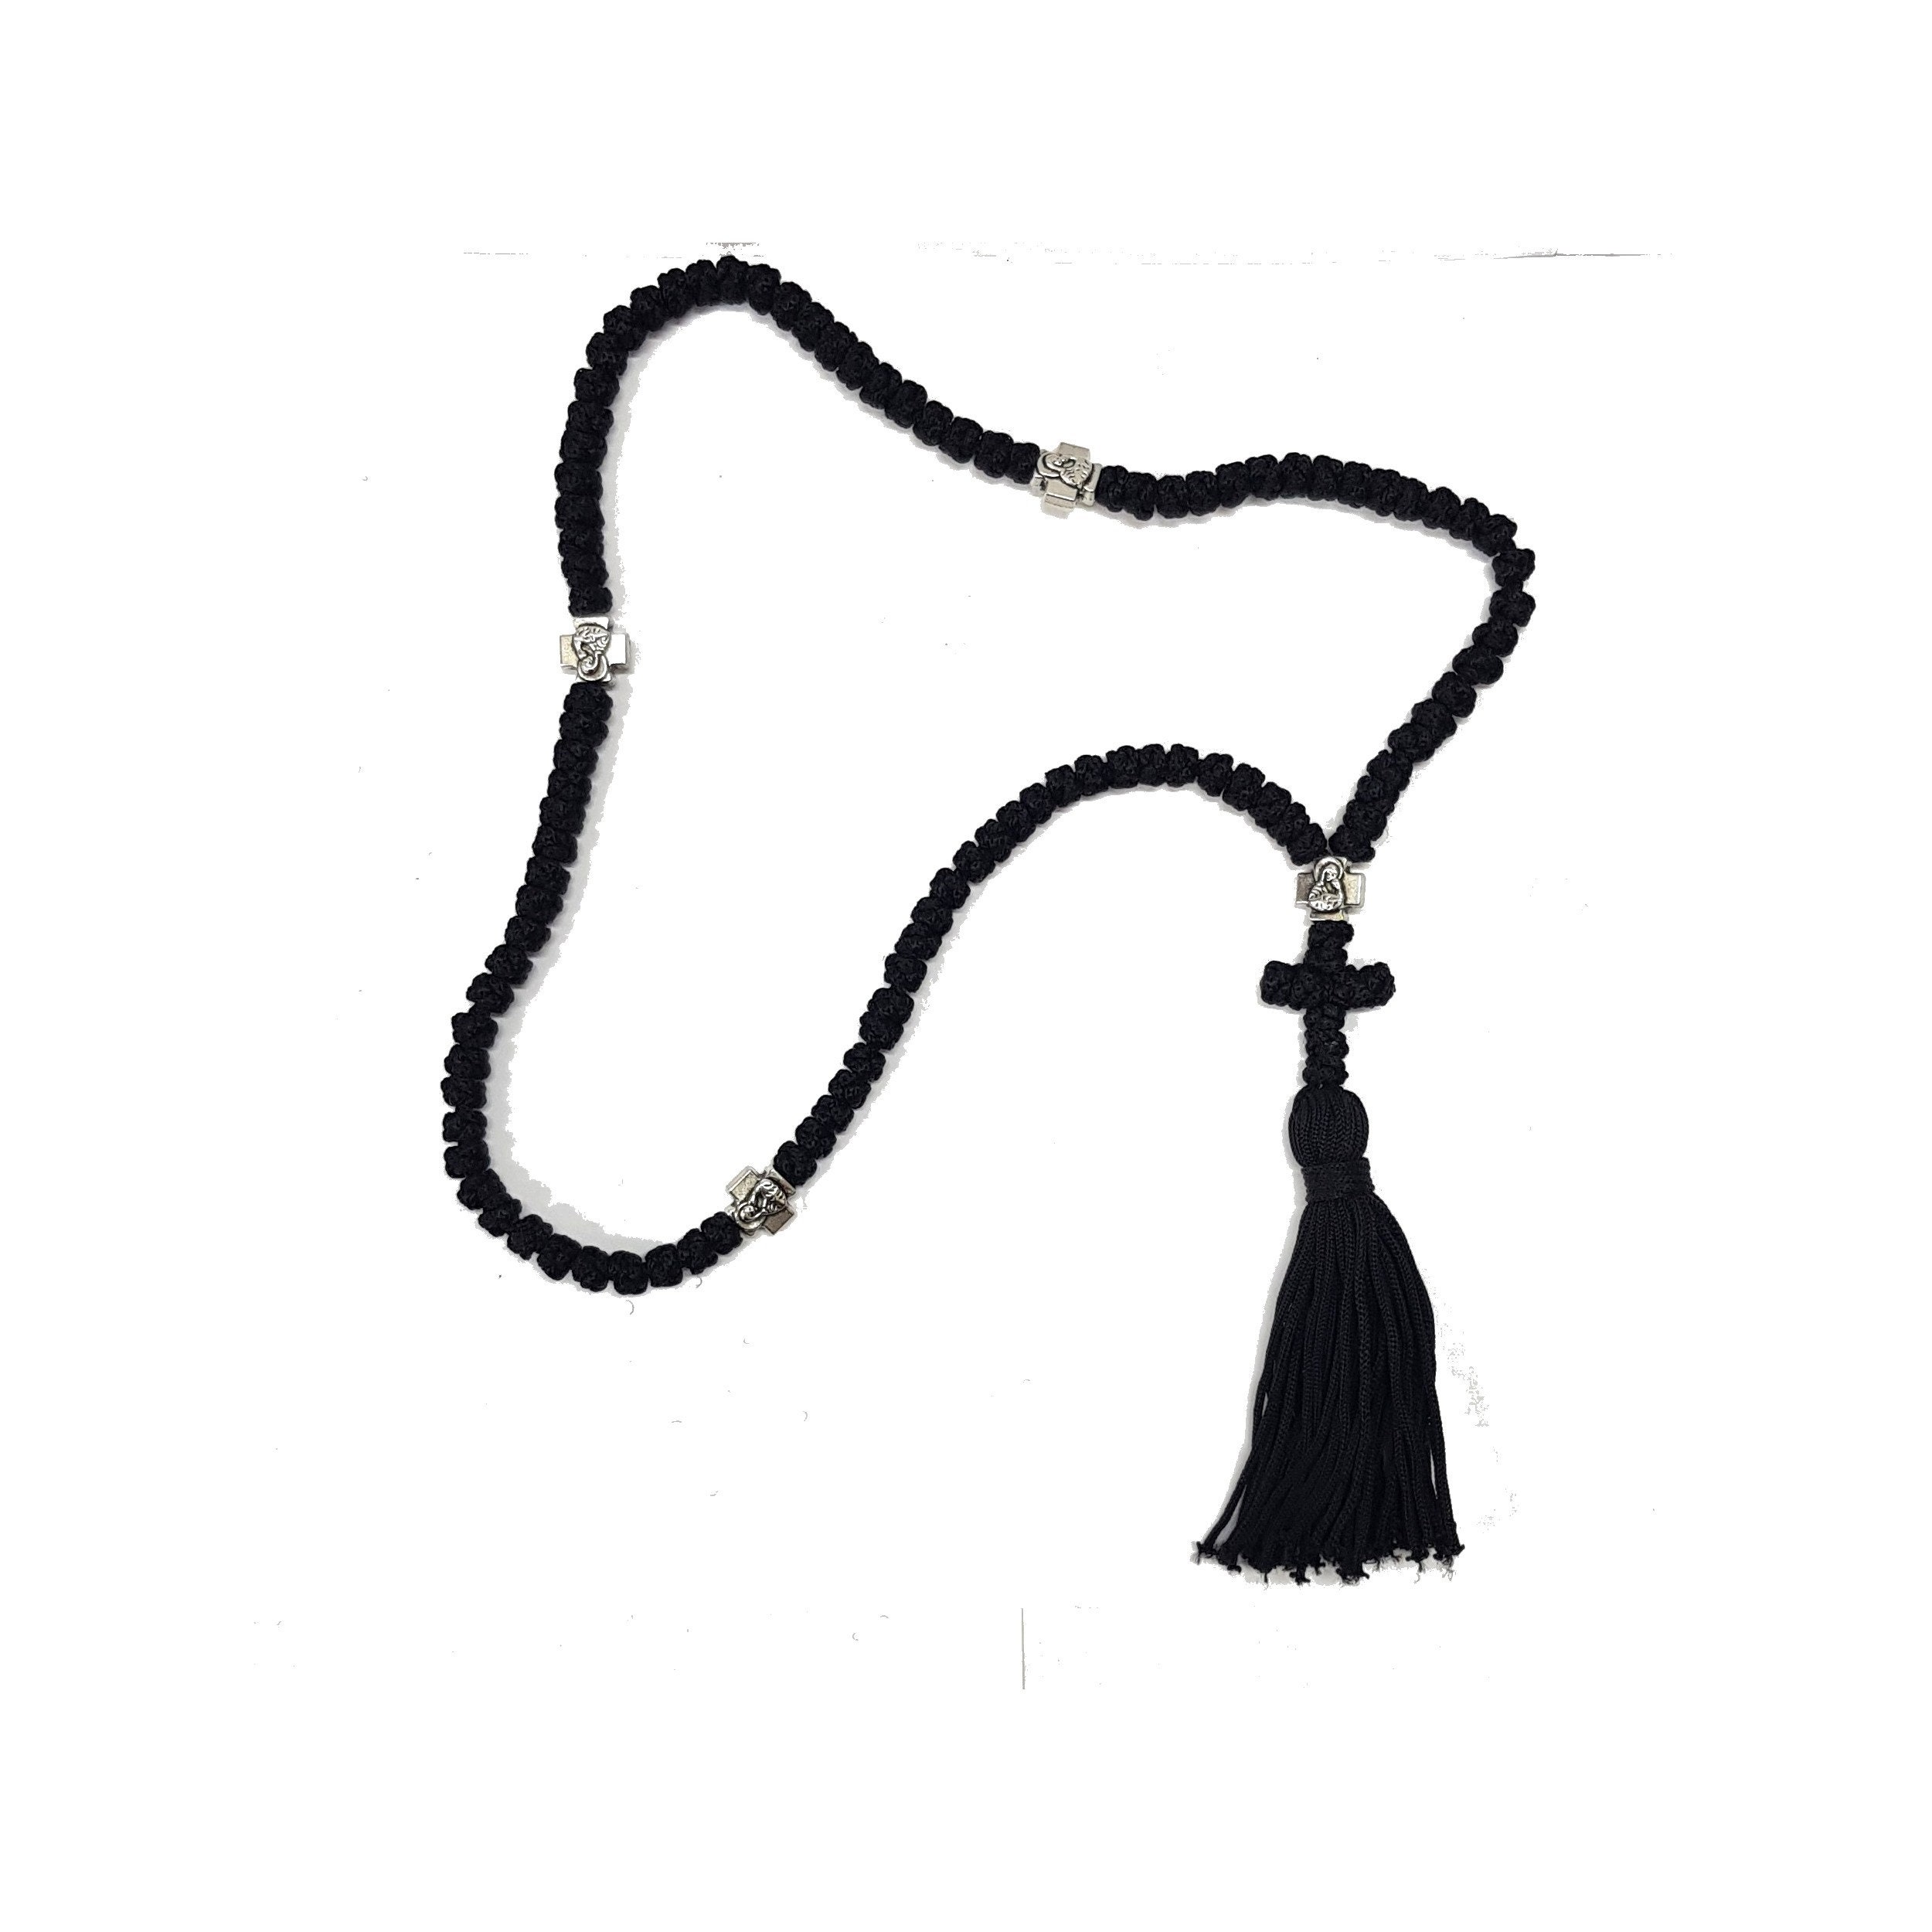 Orthodox Christian Black Prayer Rope 100 knots with Blue Beads, Praying  Ropes, Orthodox Family www. Online Christian Art Store. Greek  Orthodox Incense, Holy Icons, Church Supplies